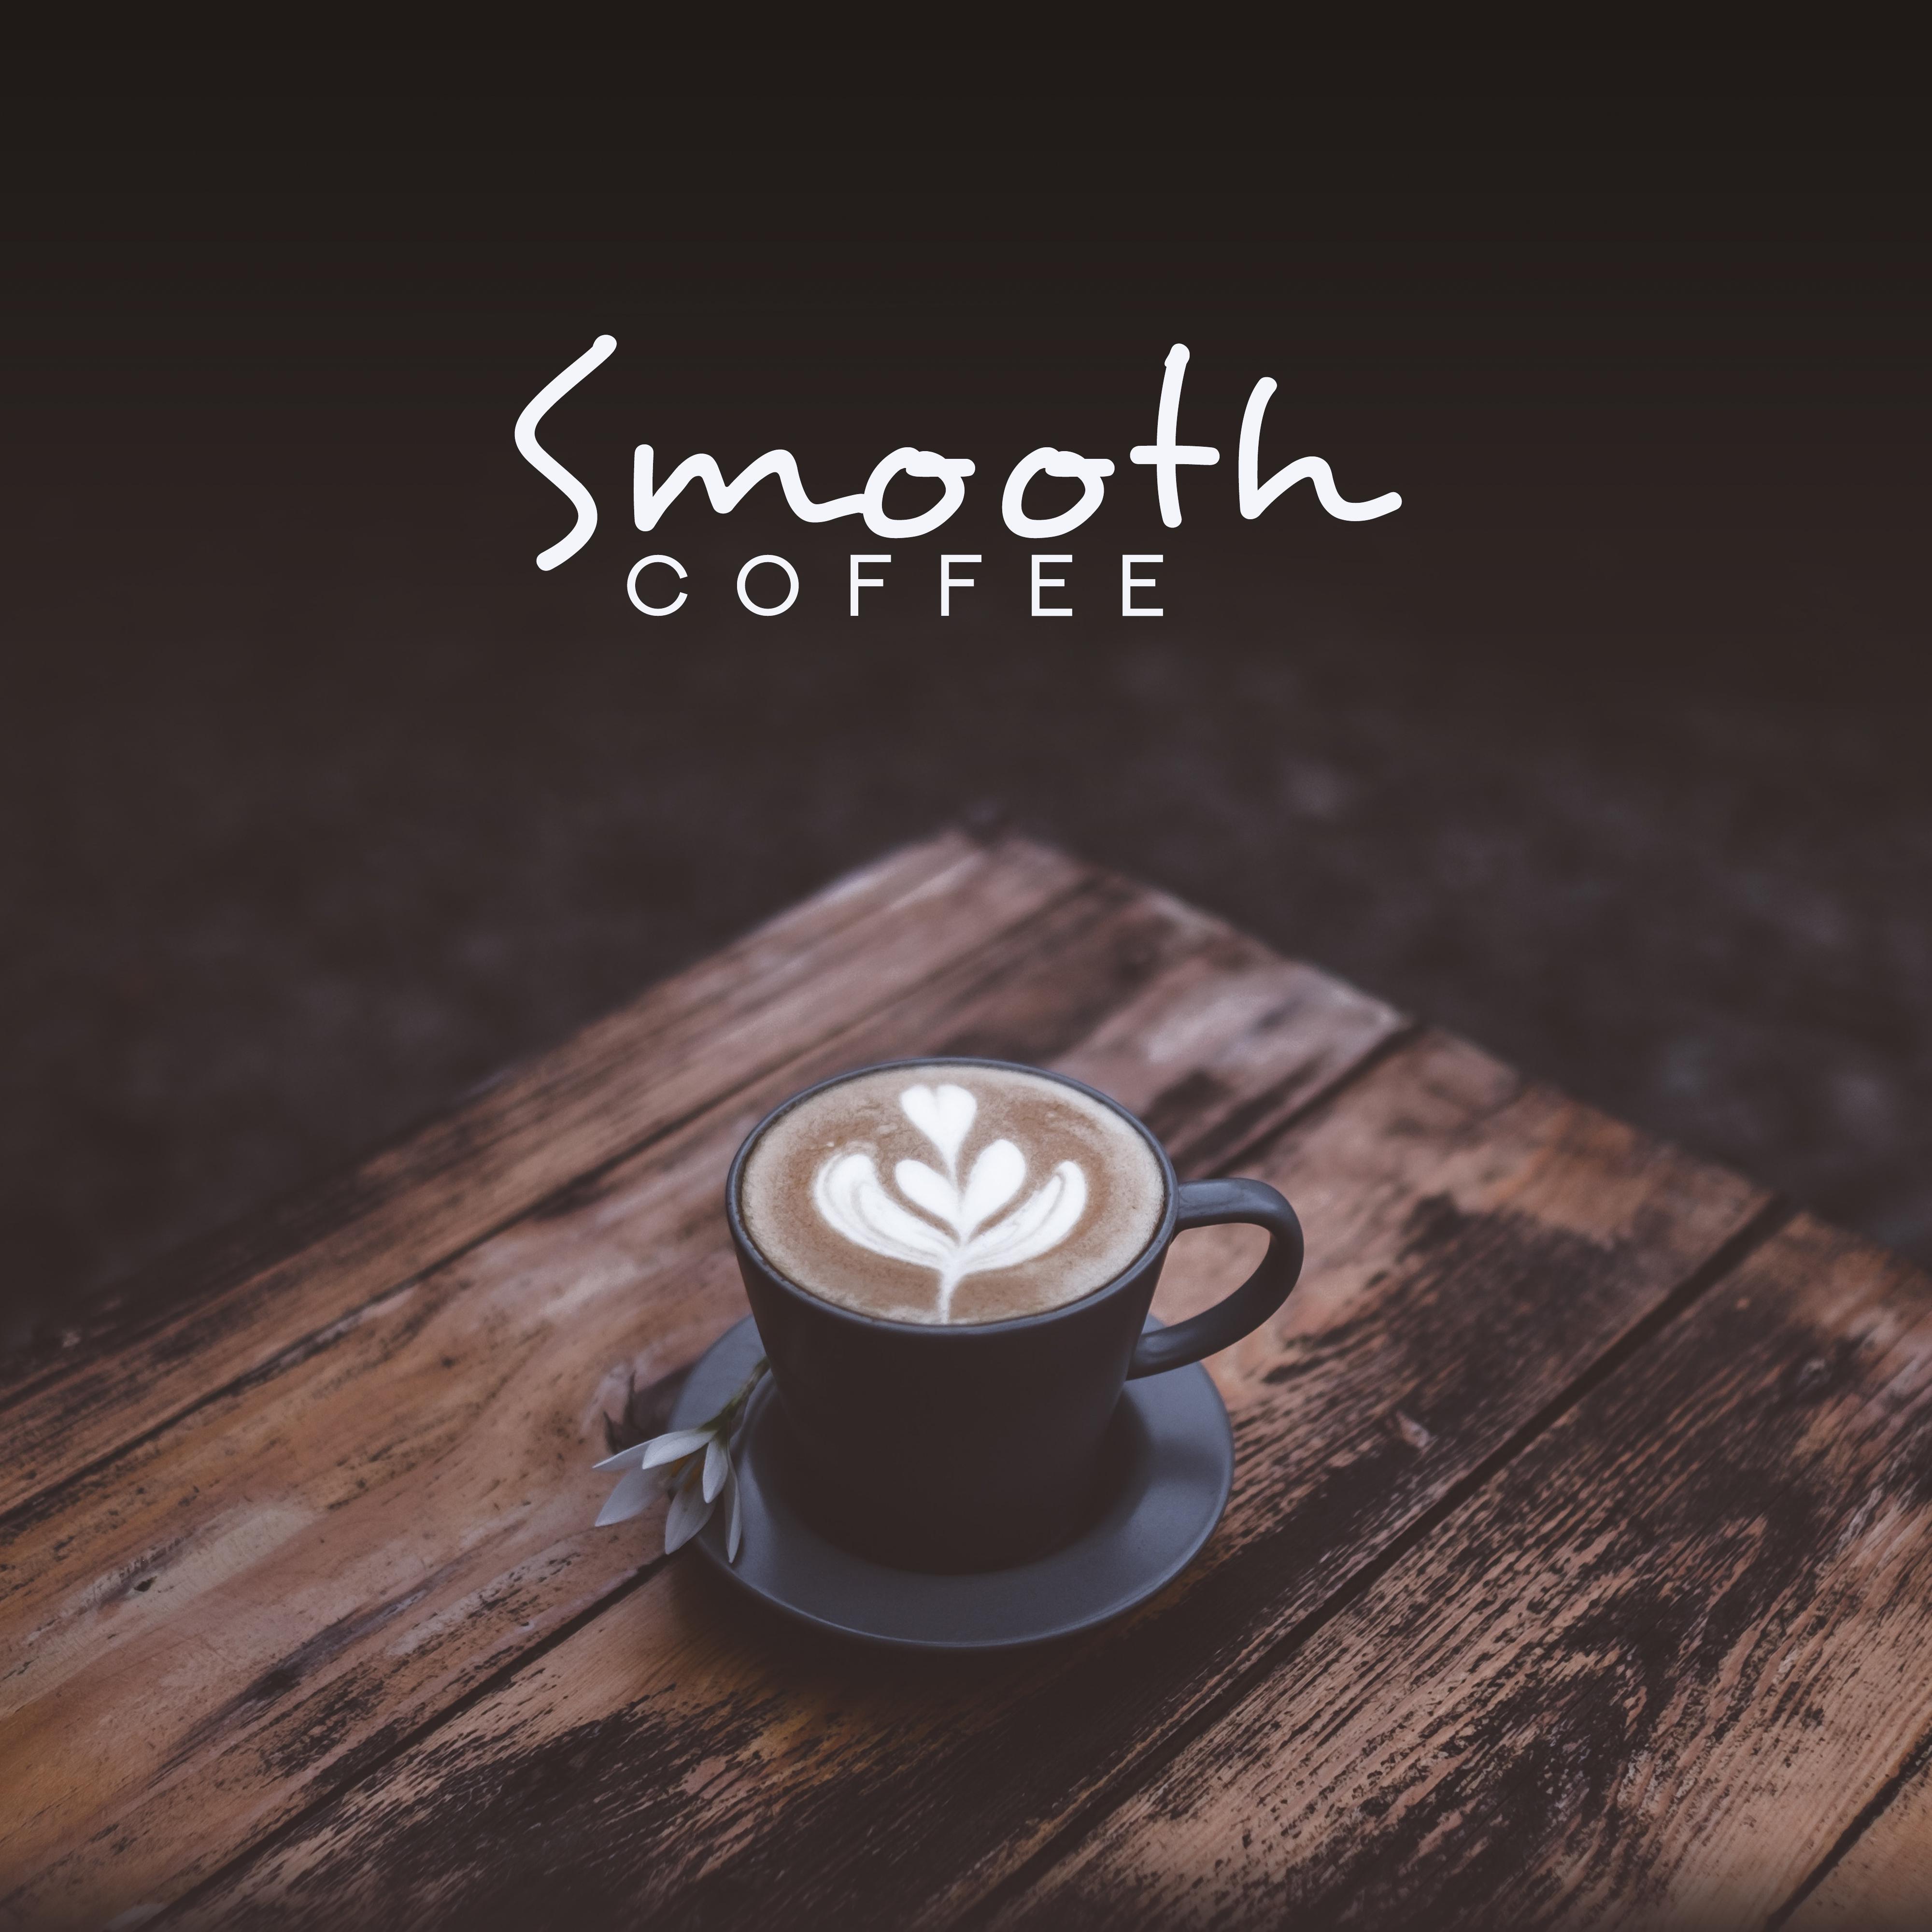 Smooth Coffee  Romantic Music for Relaxation, Jazz Coffee, Jazz Music Ambient, Best of Bar Jazz, Romantic Date